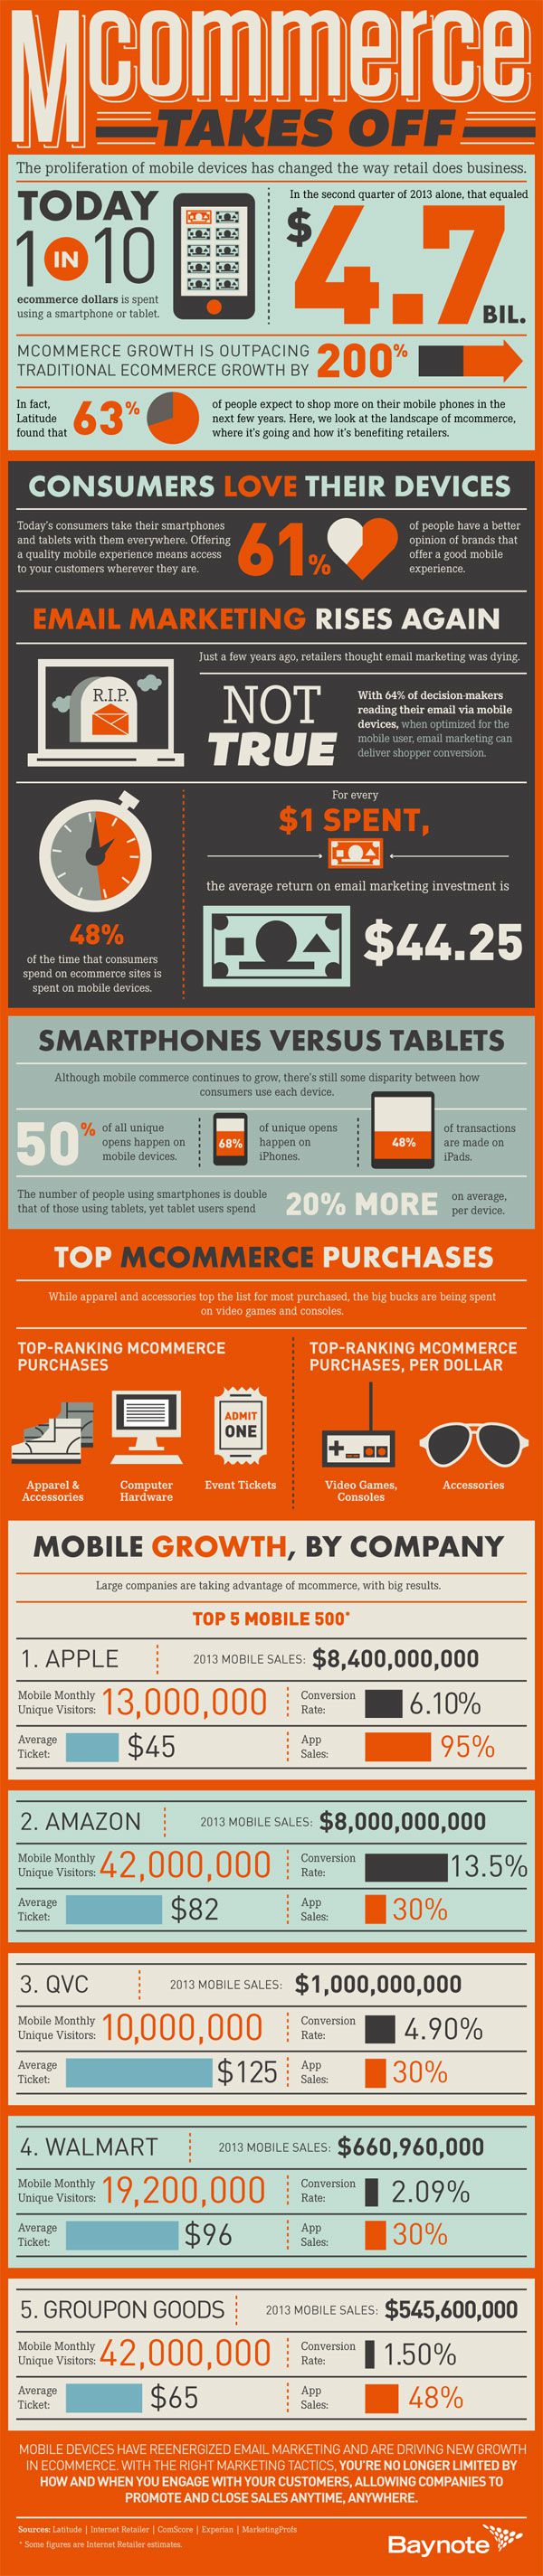 Mobile commerce taking off - infographic by Baynote - 2013